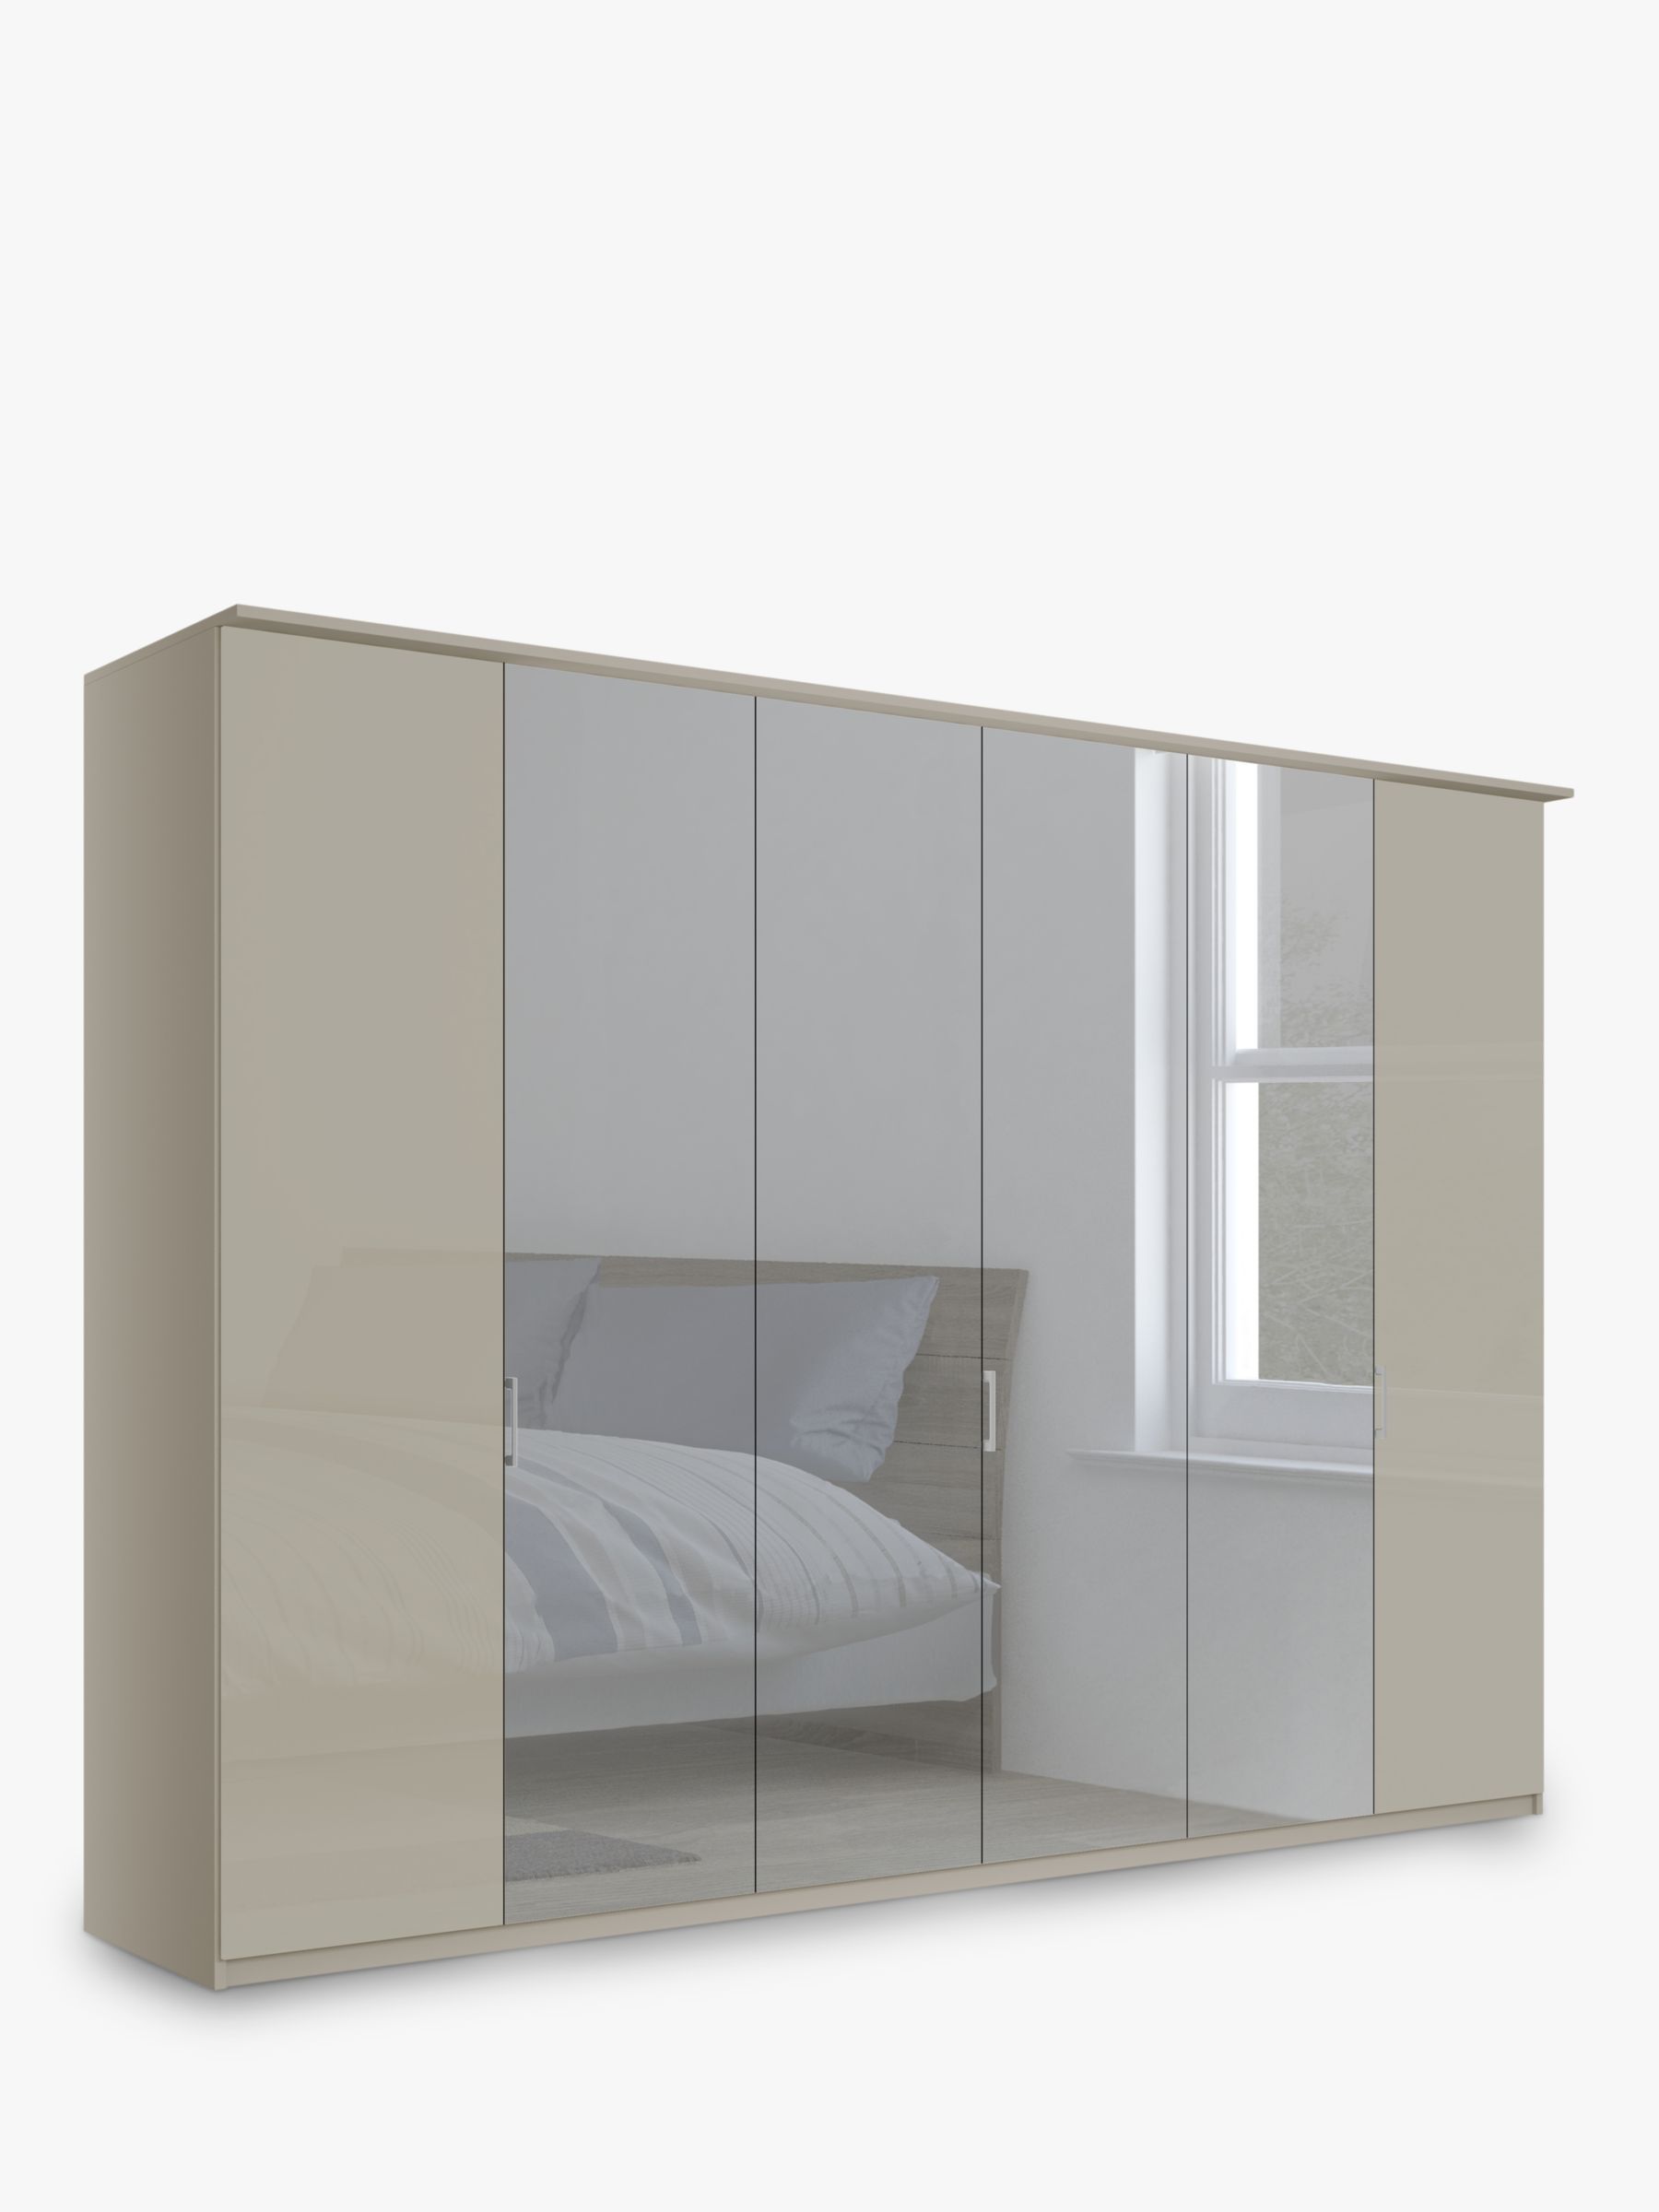 Photo of John lewis elstra 300cm wardrobe with glass and mirrored hinged doors